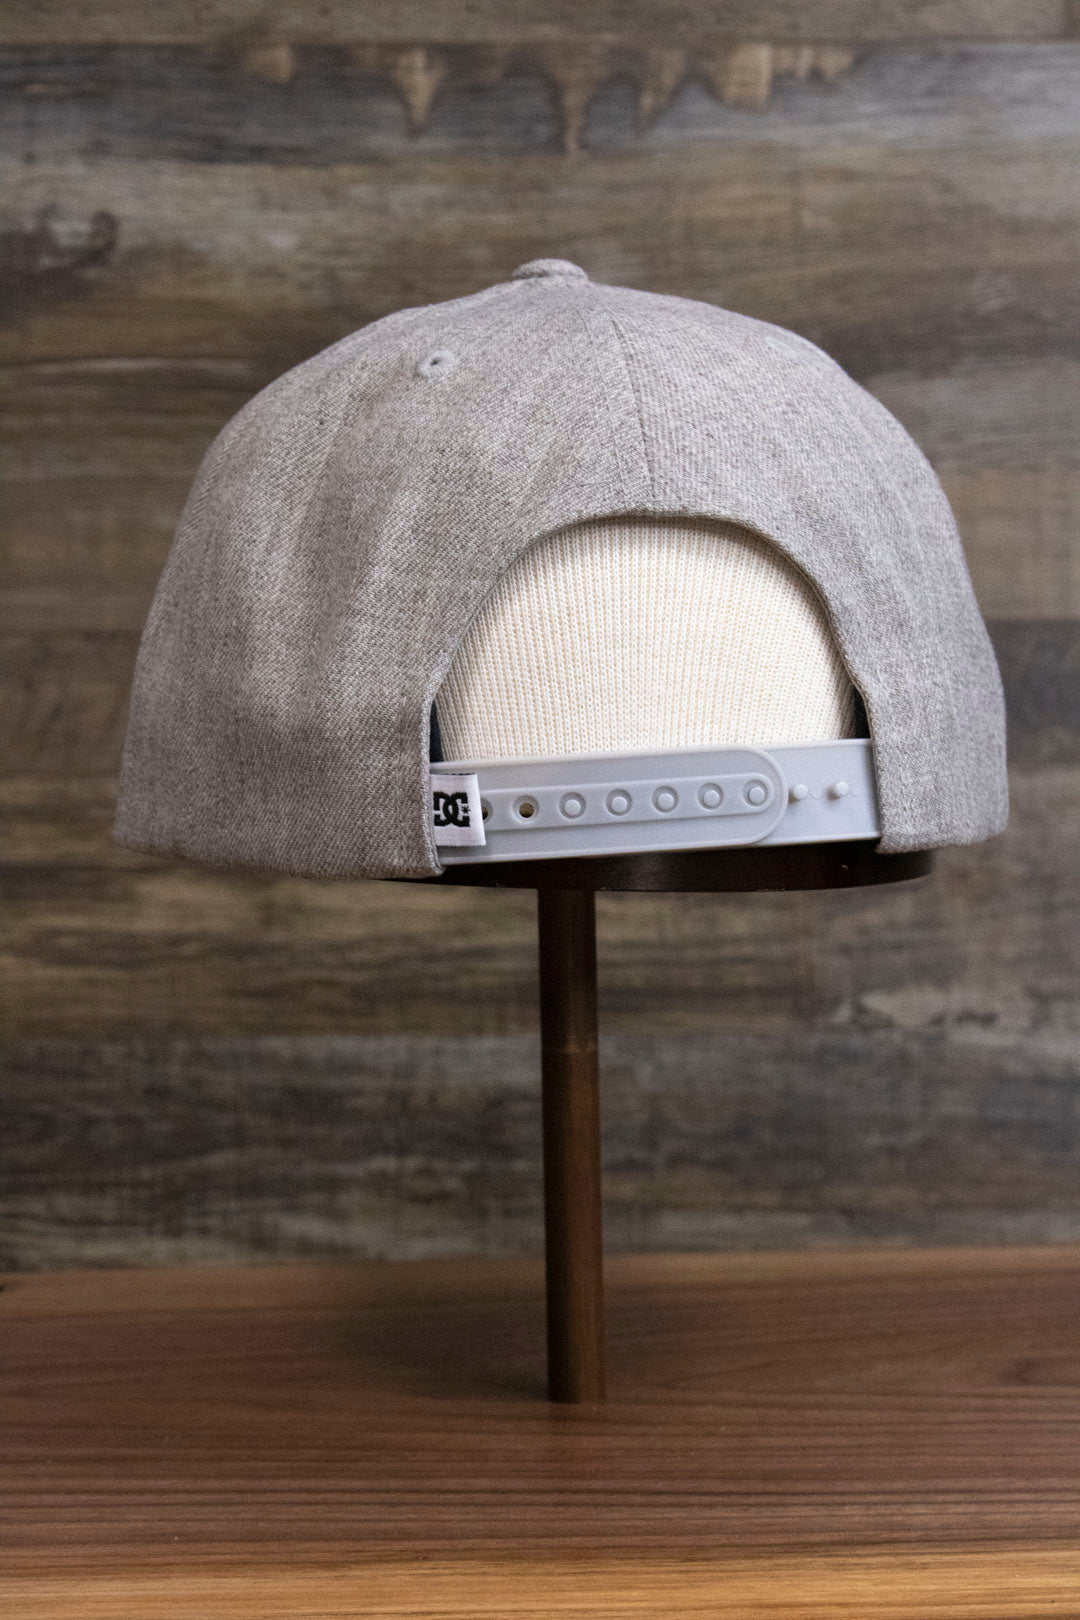 the 2-Tone Gray Snapback Skater Hat | DC Shoes Black Bottom Snap Back Cap has a matching adjustable strap on the back